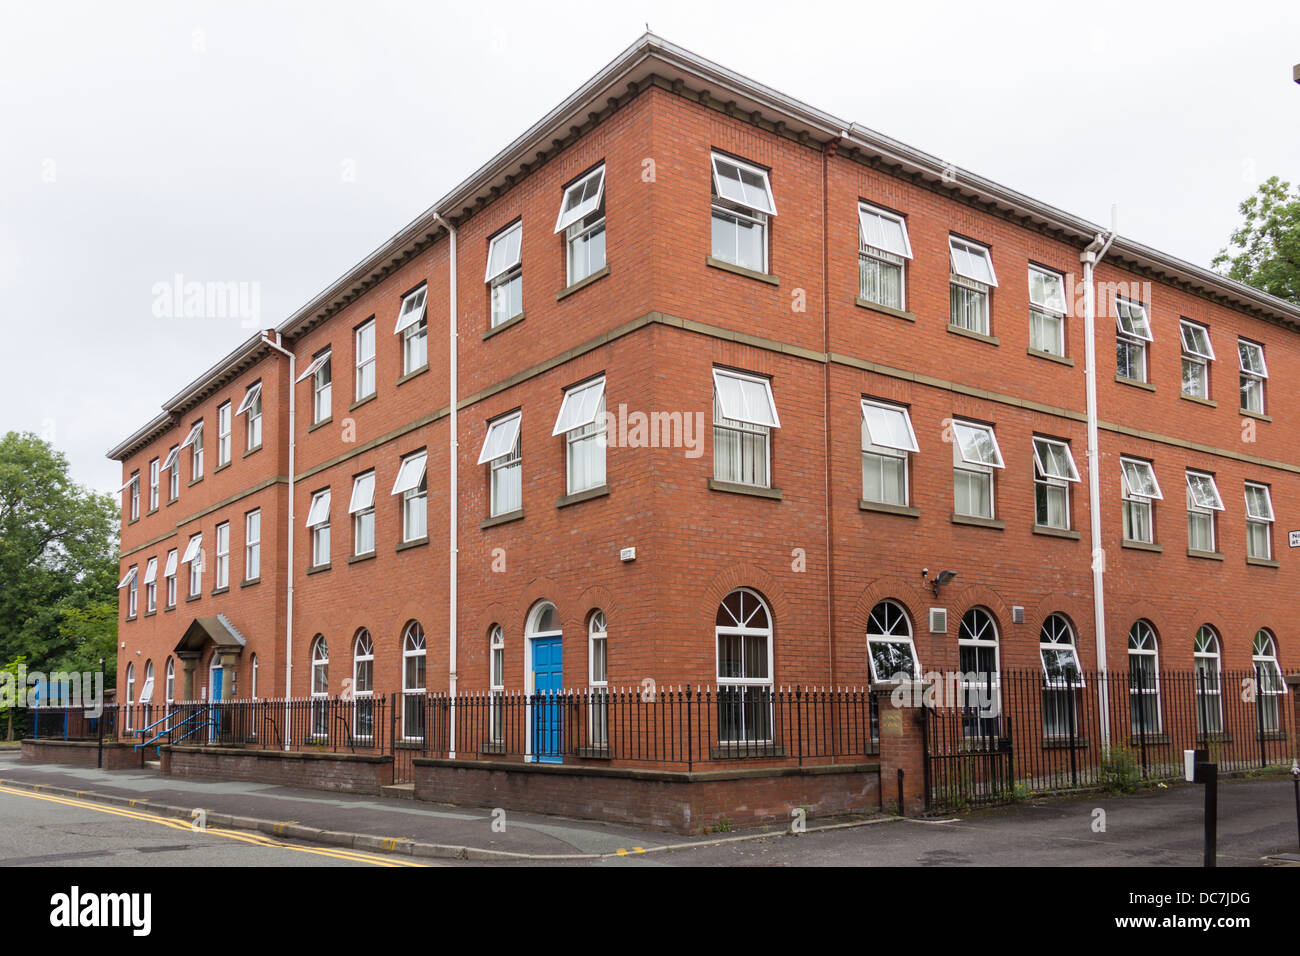 St. Peter's House on Silverwell Street in Bolton, Lancashire. The building is home to Bolton Clinical Commissioning Group. Stock Photo